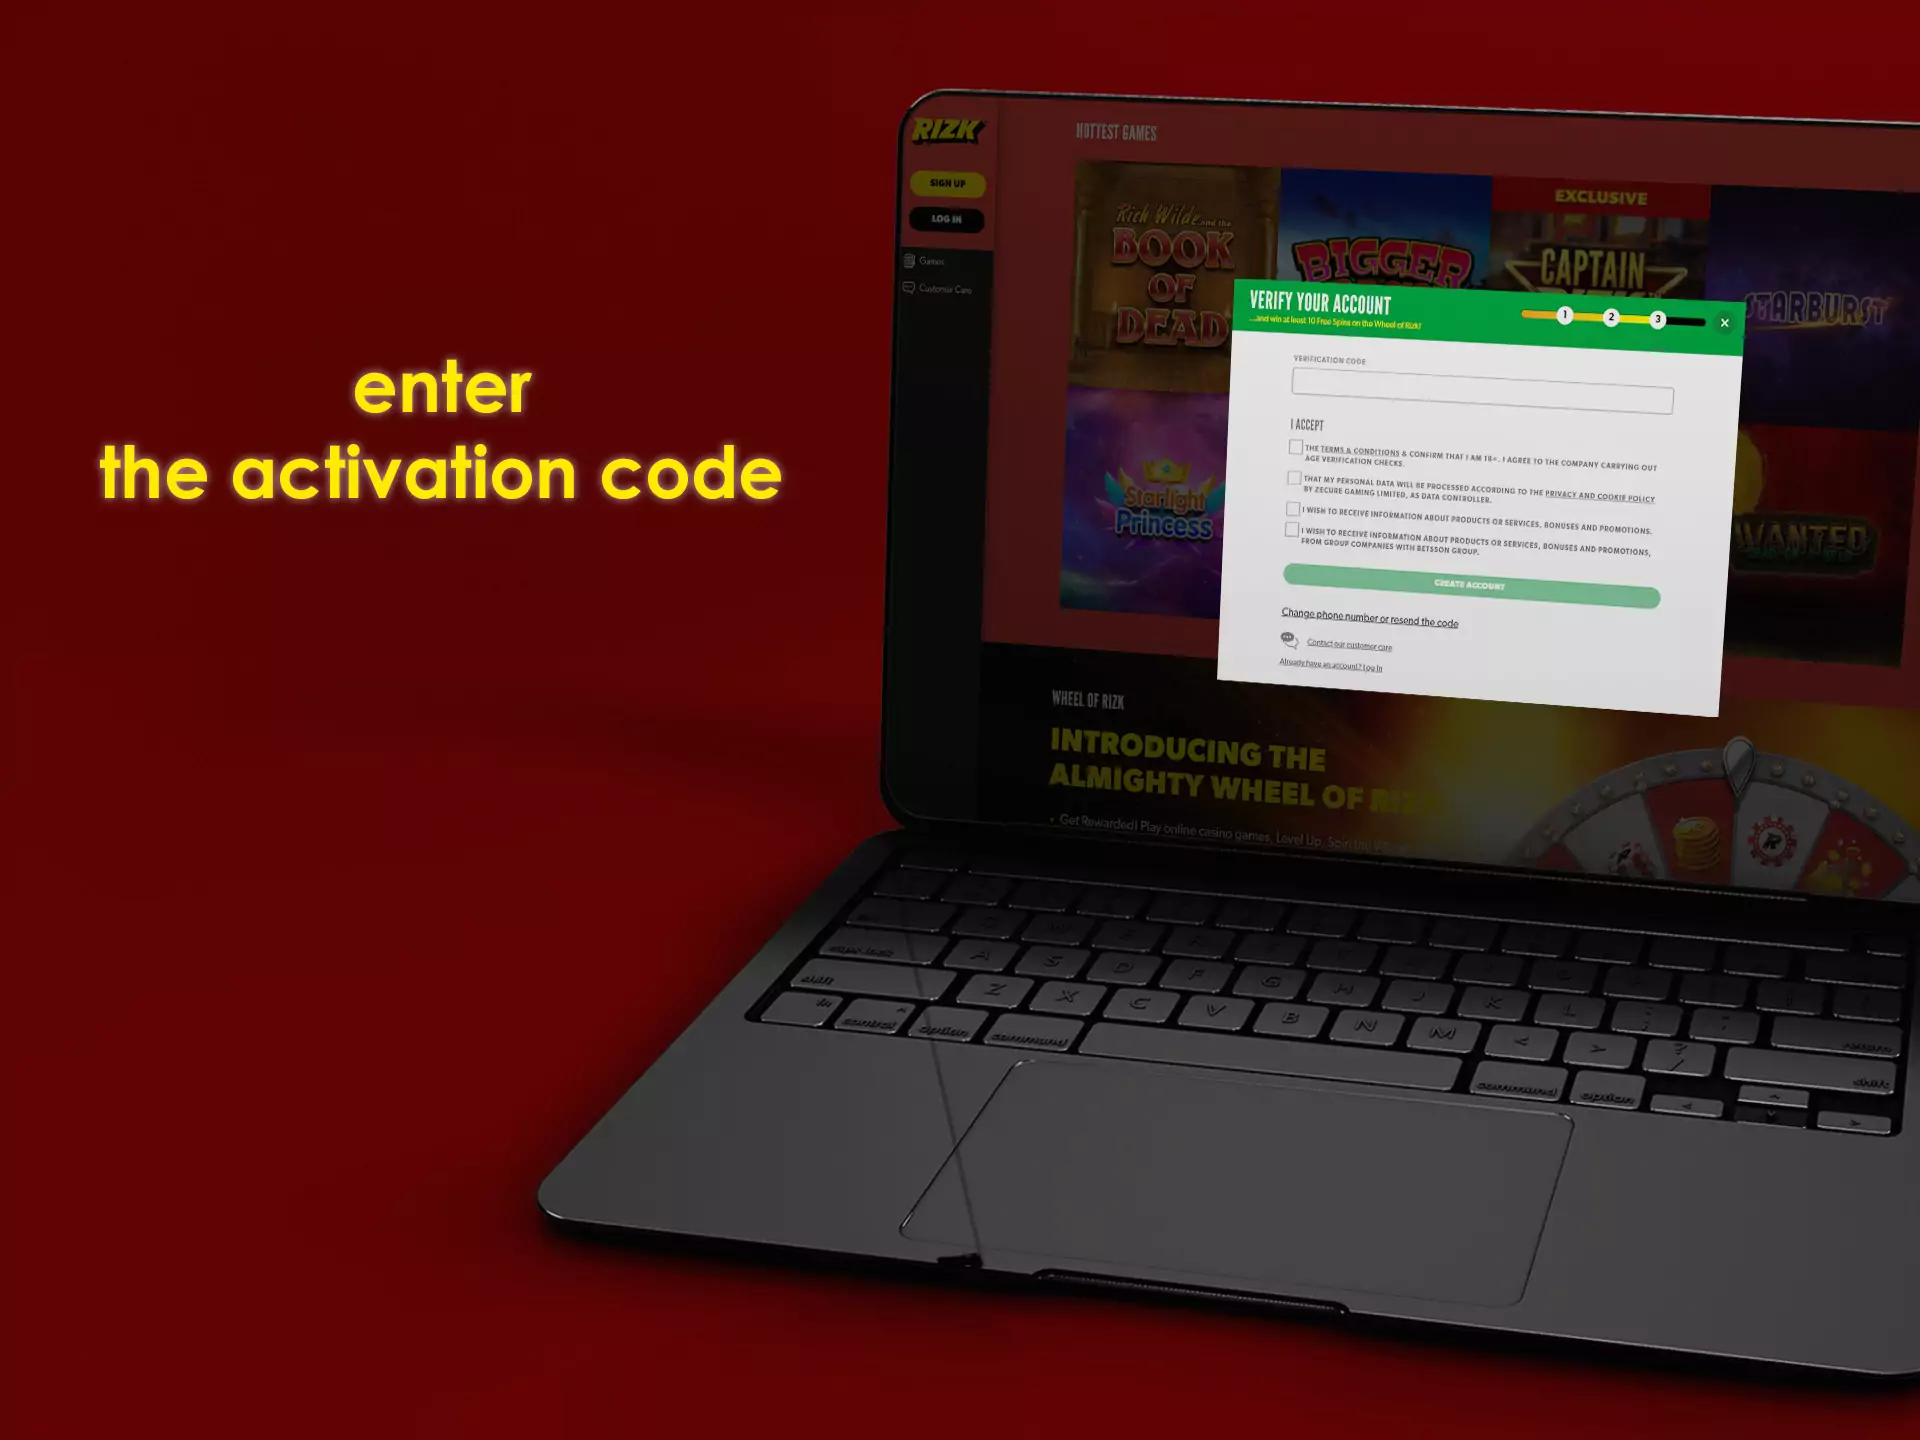 At the last step, enter the activation code you have received in the SMS from the Rizk Casino.